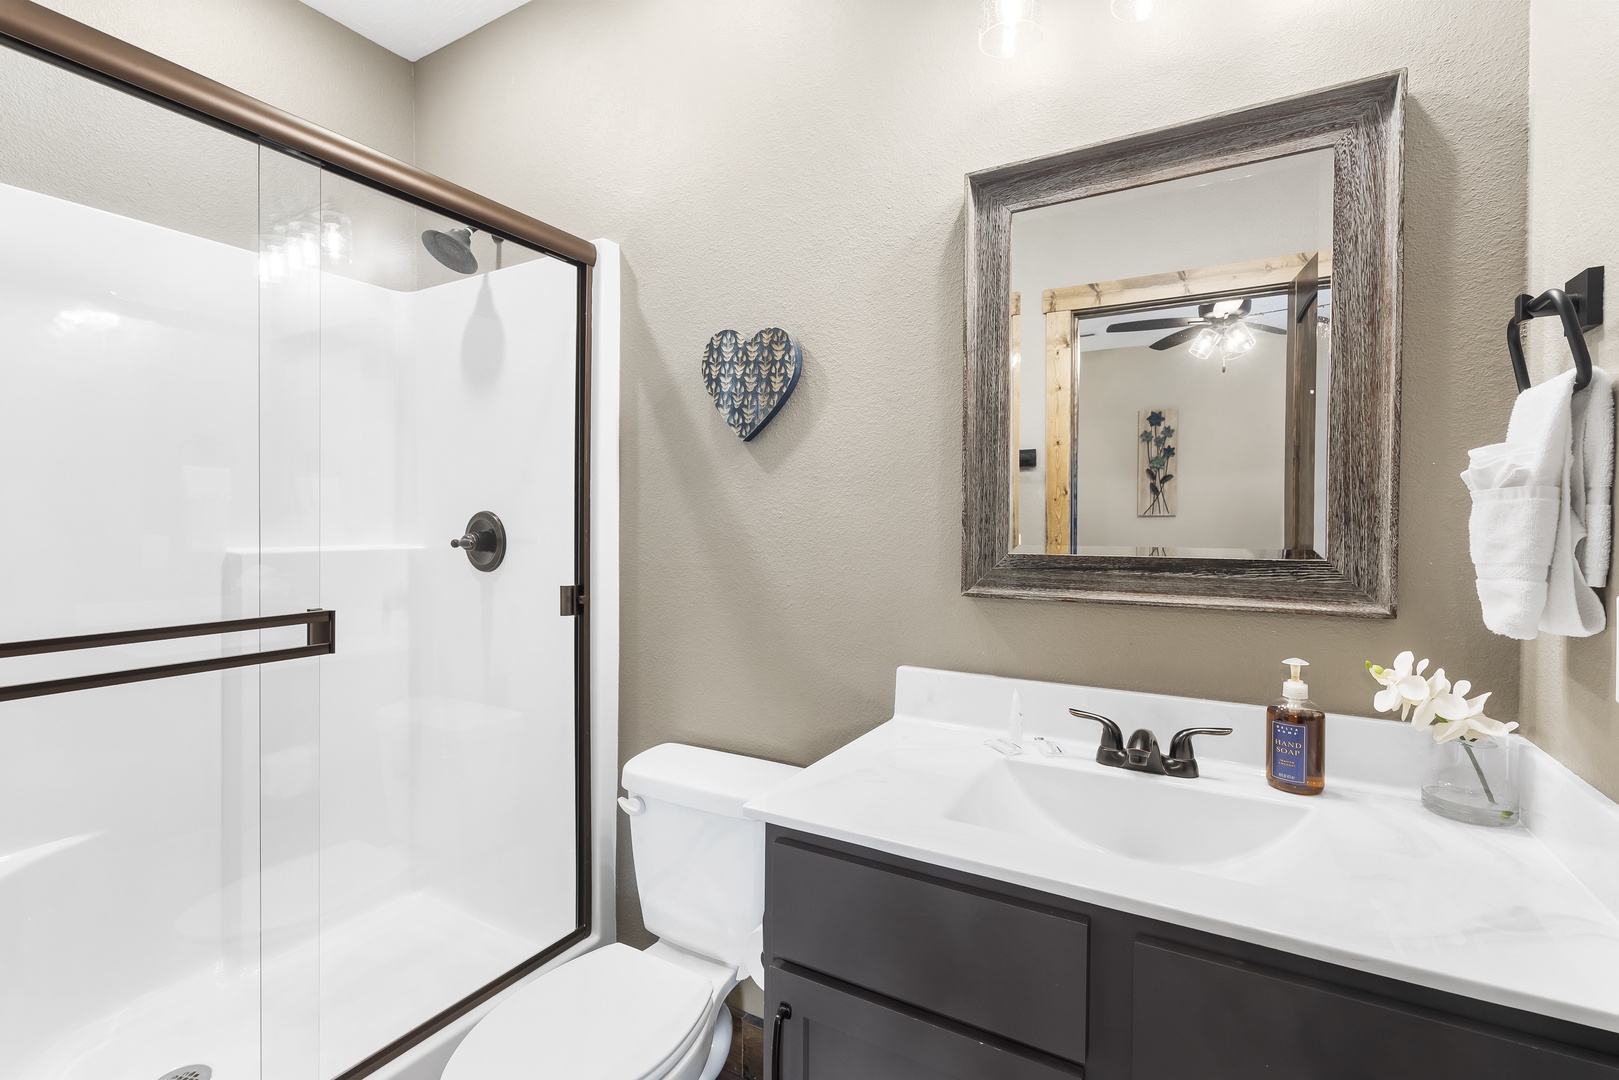 The third bedroom’s ensuite offers a single vanity & glass shower